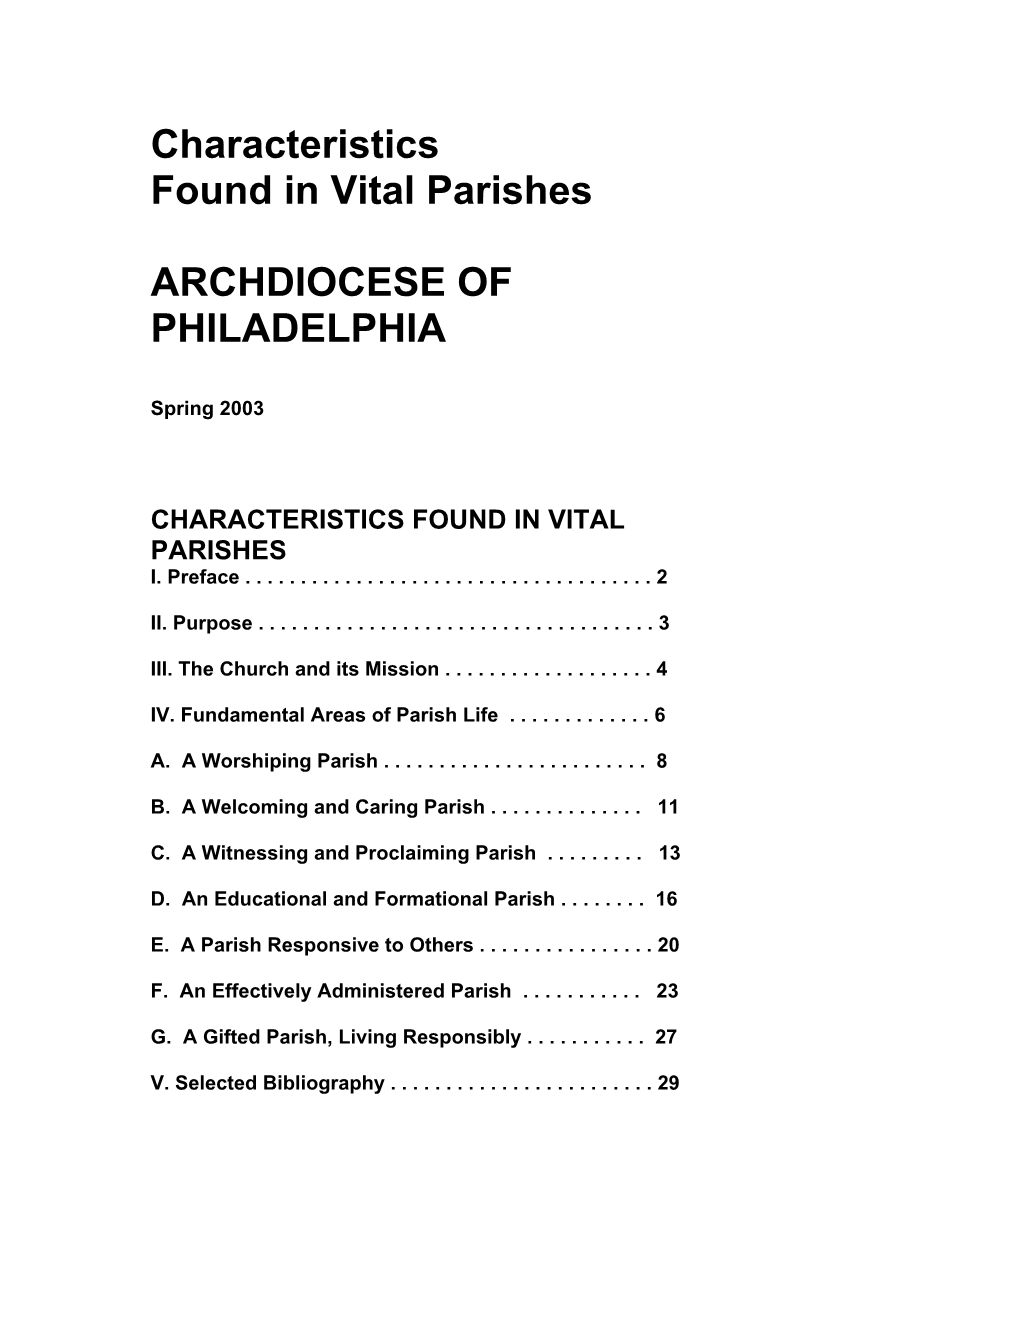 Characteristic Found in Vital Parishes